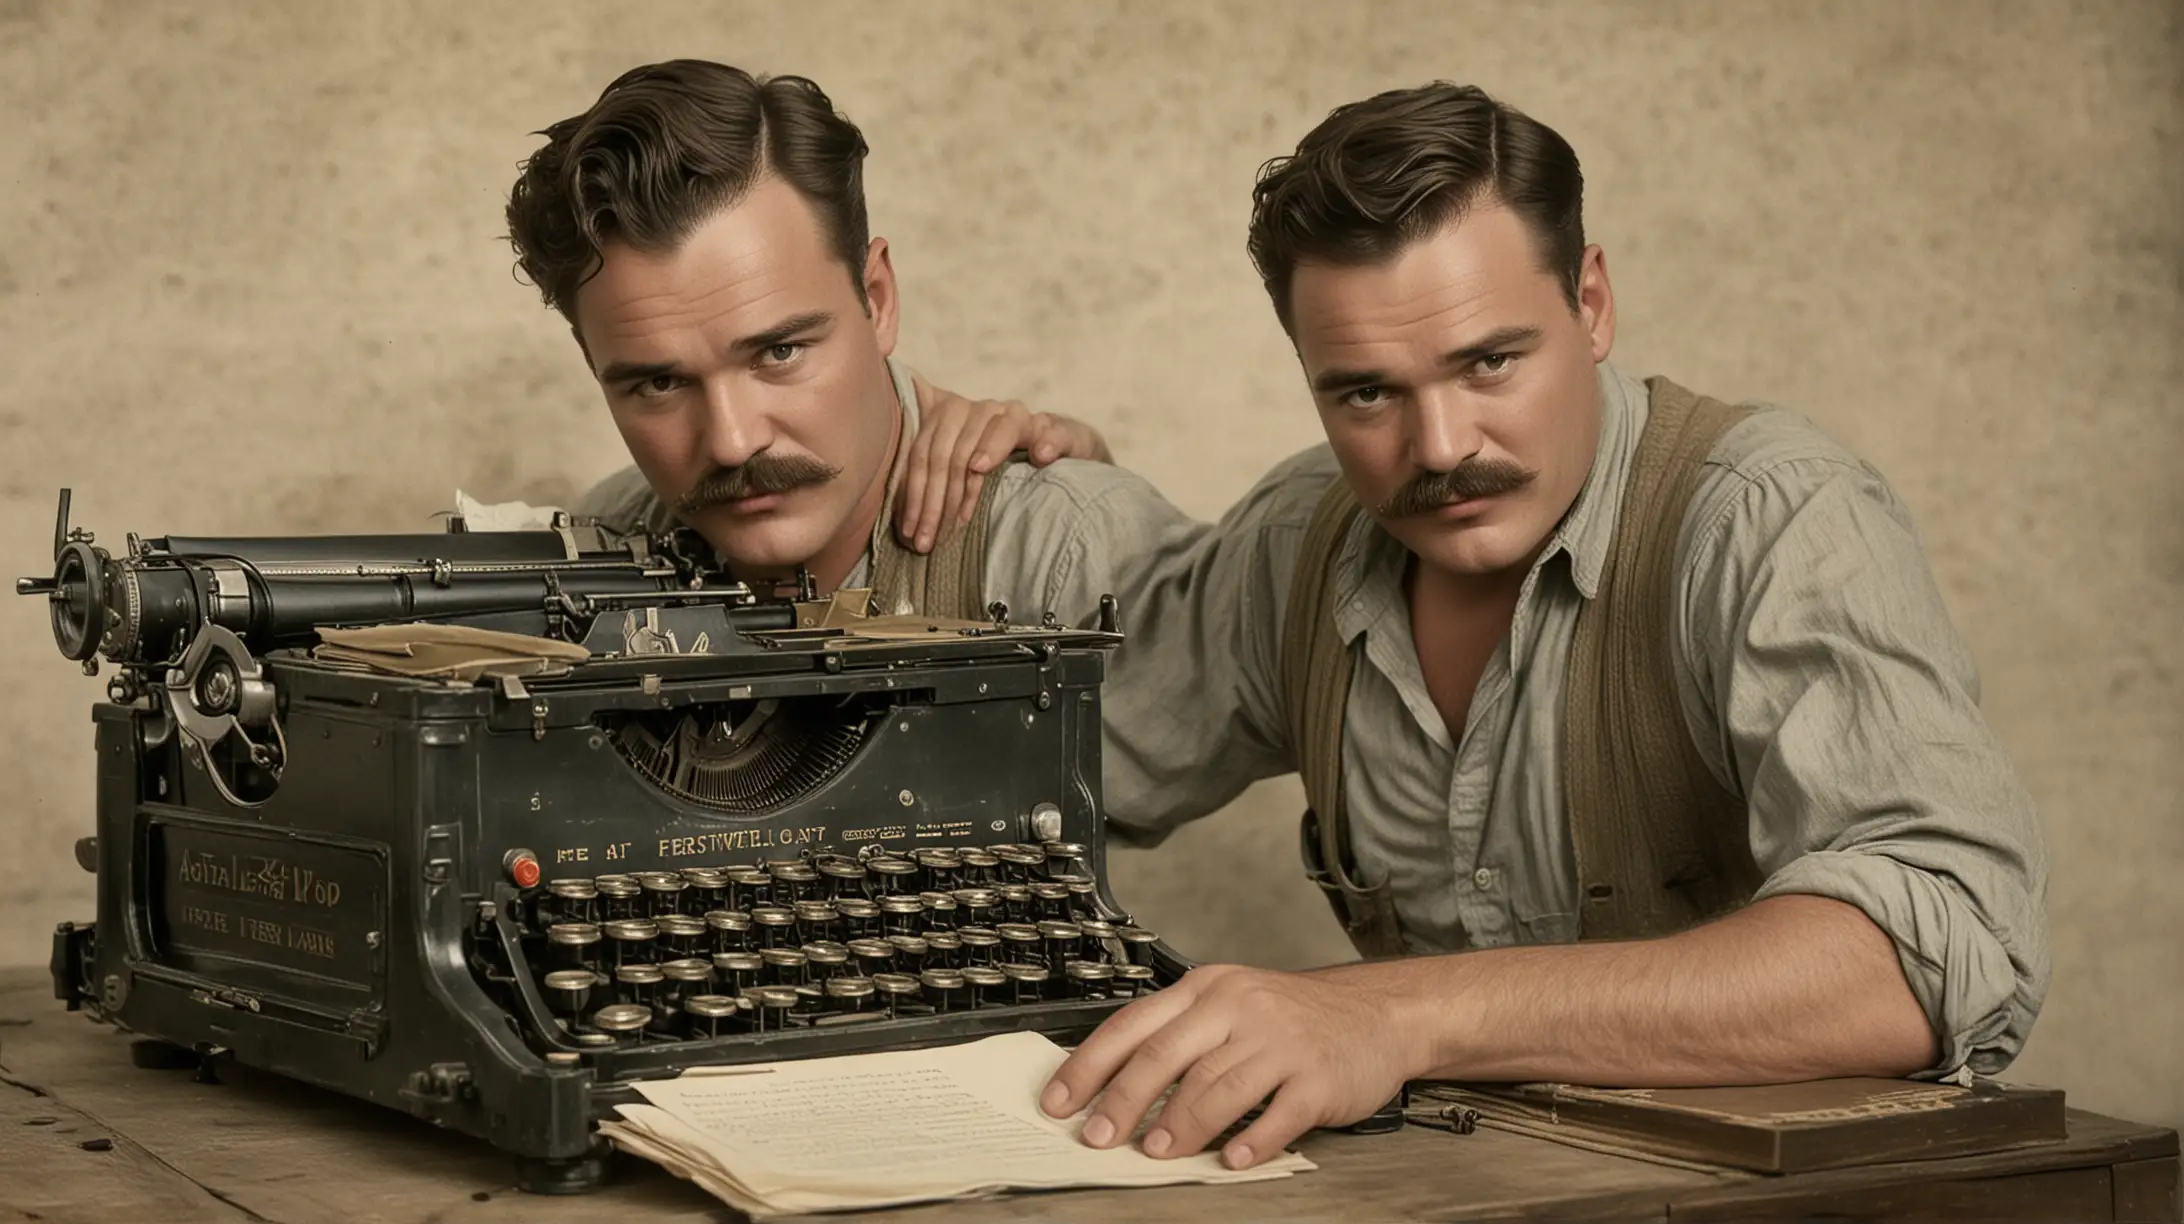 Year 1917. Ernest Hemingway He writes with the typewriter. The title of the page is "A Farewell to Arms". Styled like an old hand-colored silent film.